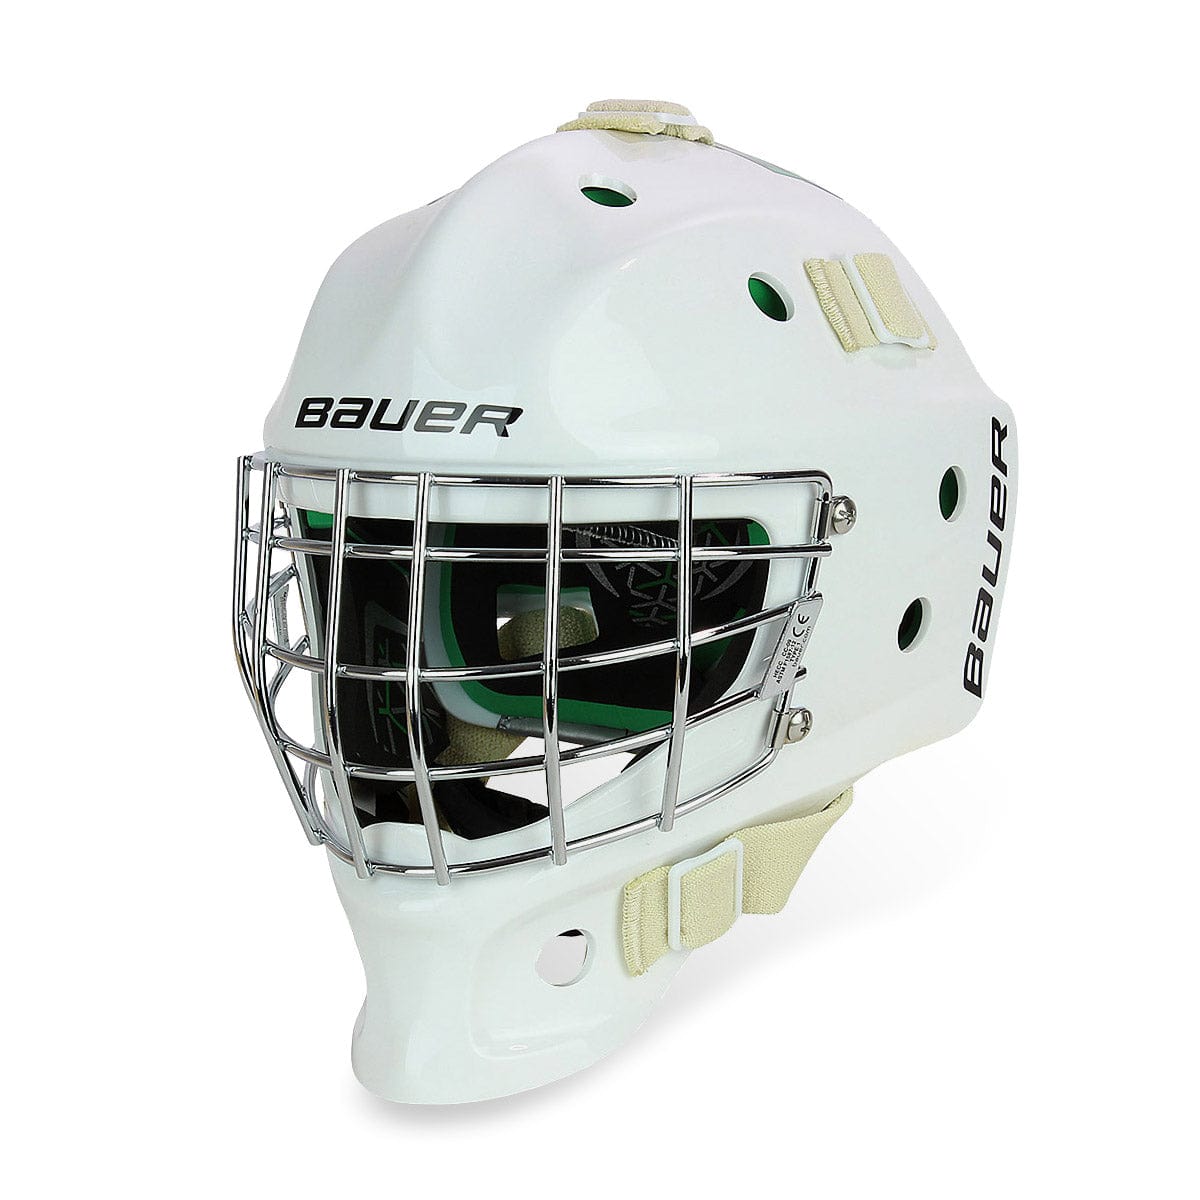 Bauer NME 4 Youth Goalie Mask - White - The Hockey Shop Source For Sports